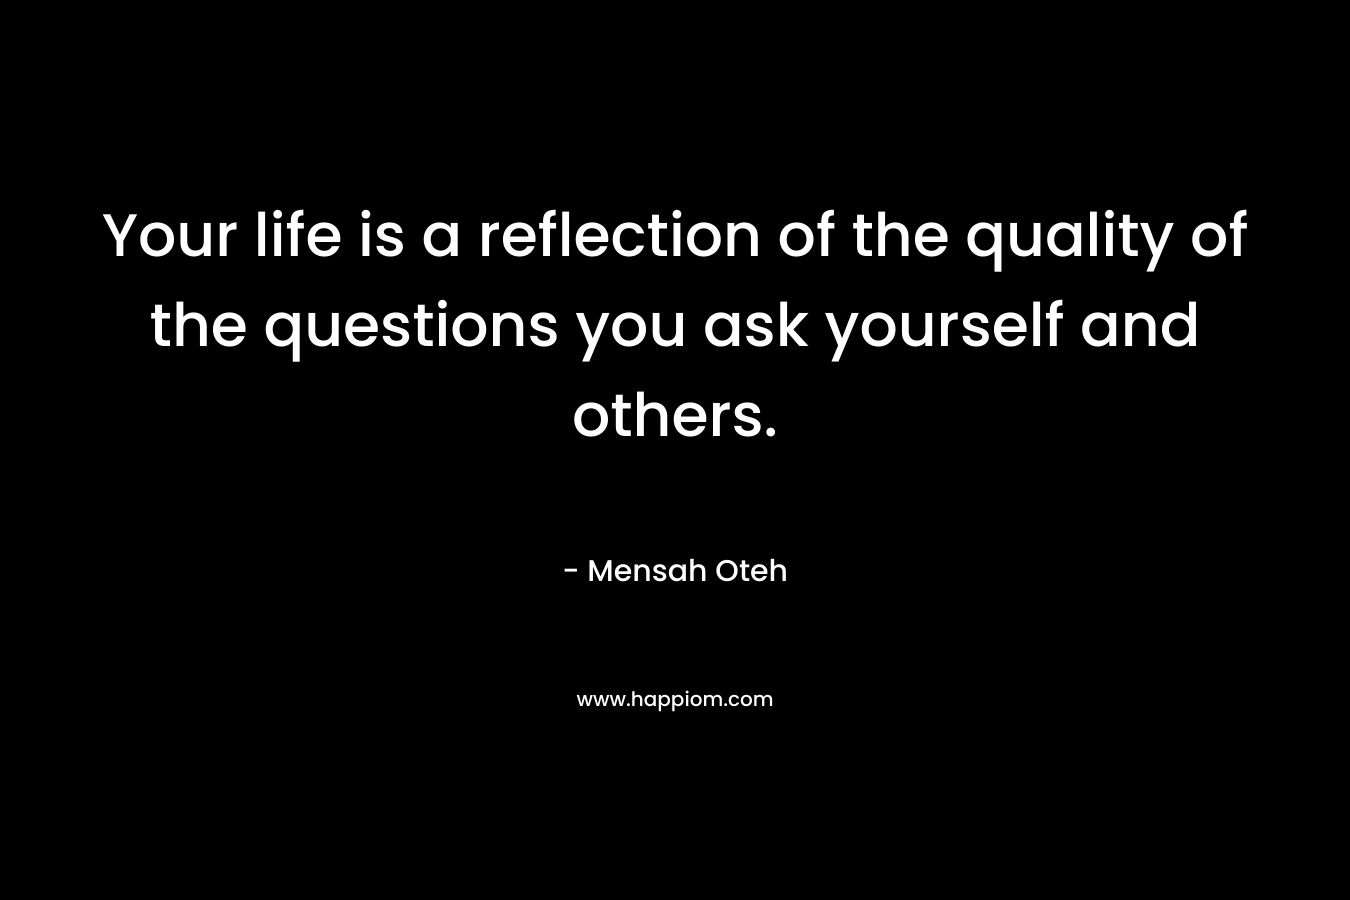 Your life is a reflection of the quality of the questions you ask yourself and others.